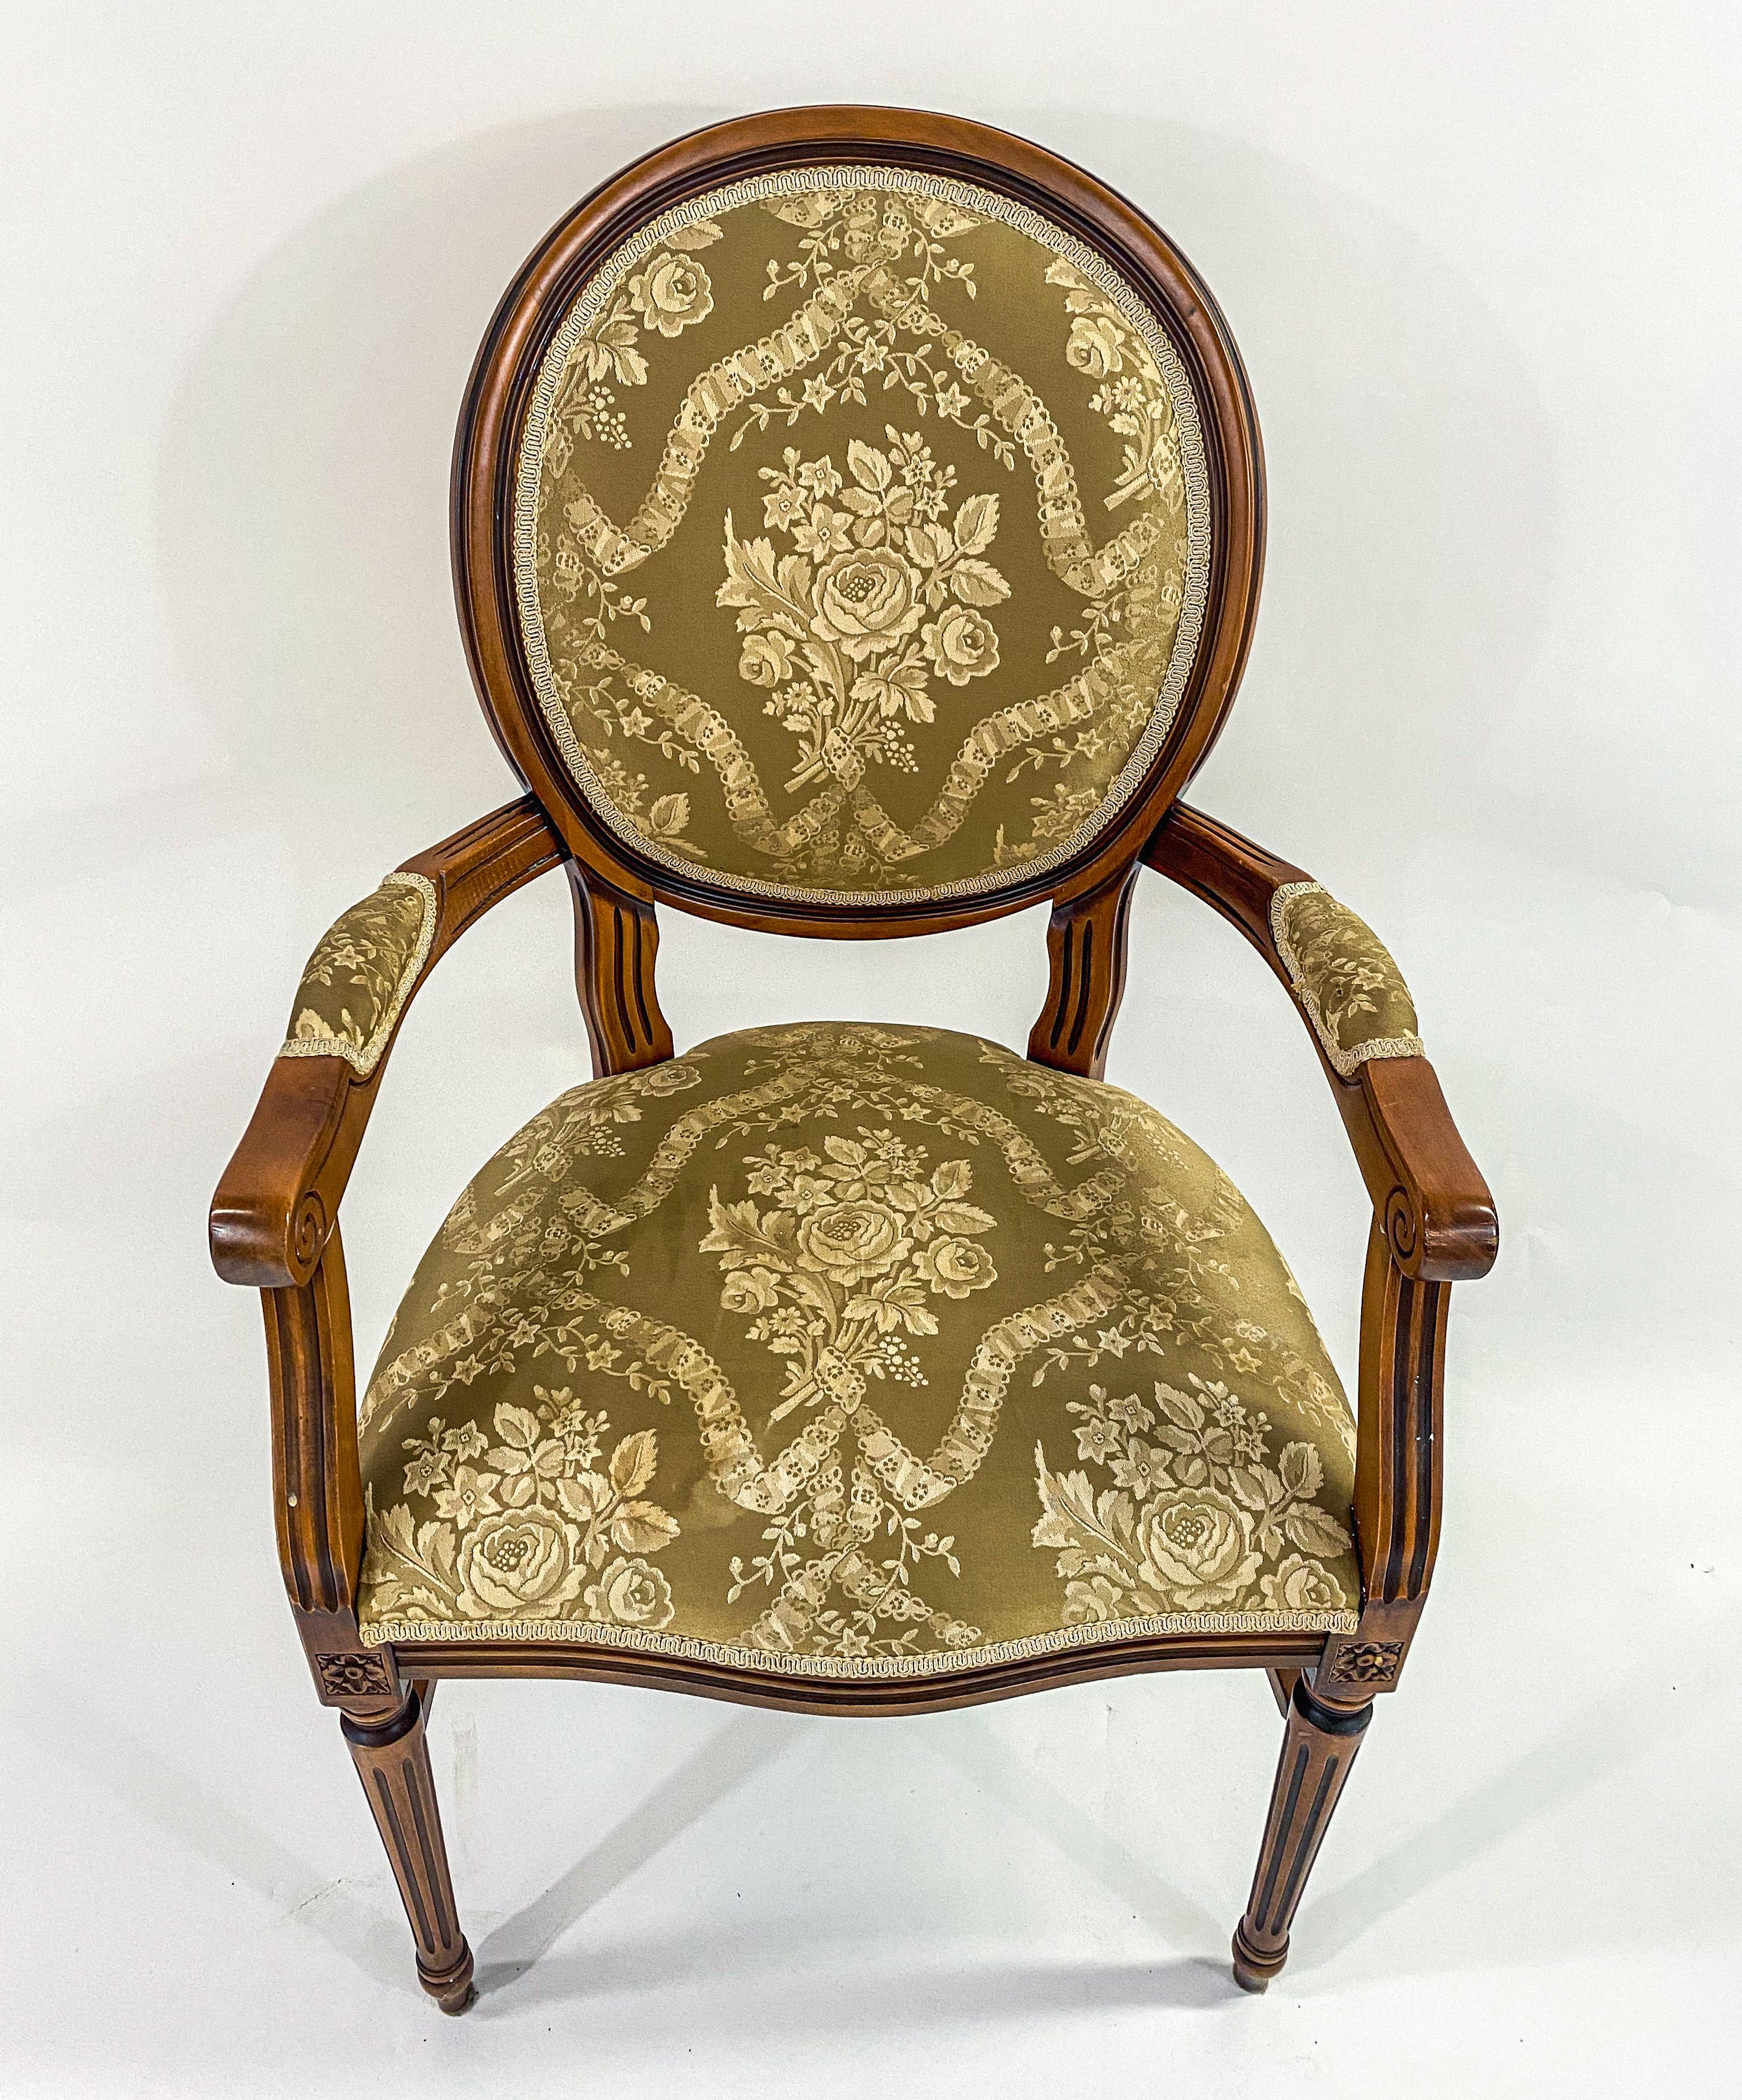 French Louis XVI Style Bergere Chair with Green Floral Upholstery, a Pair 1